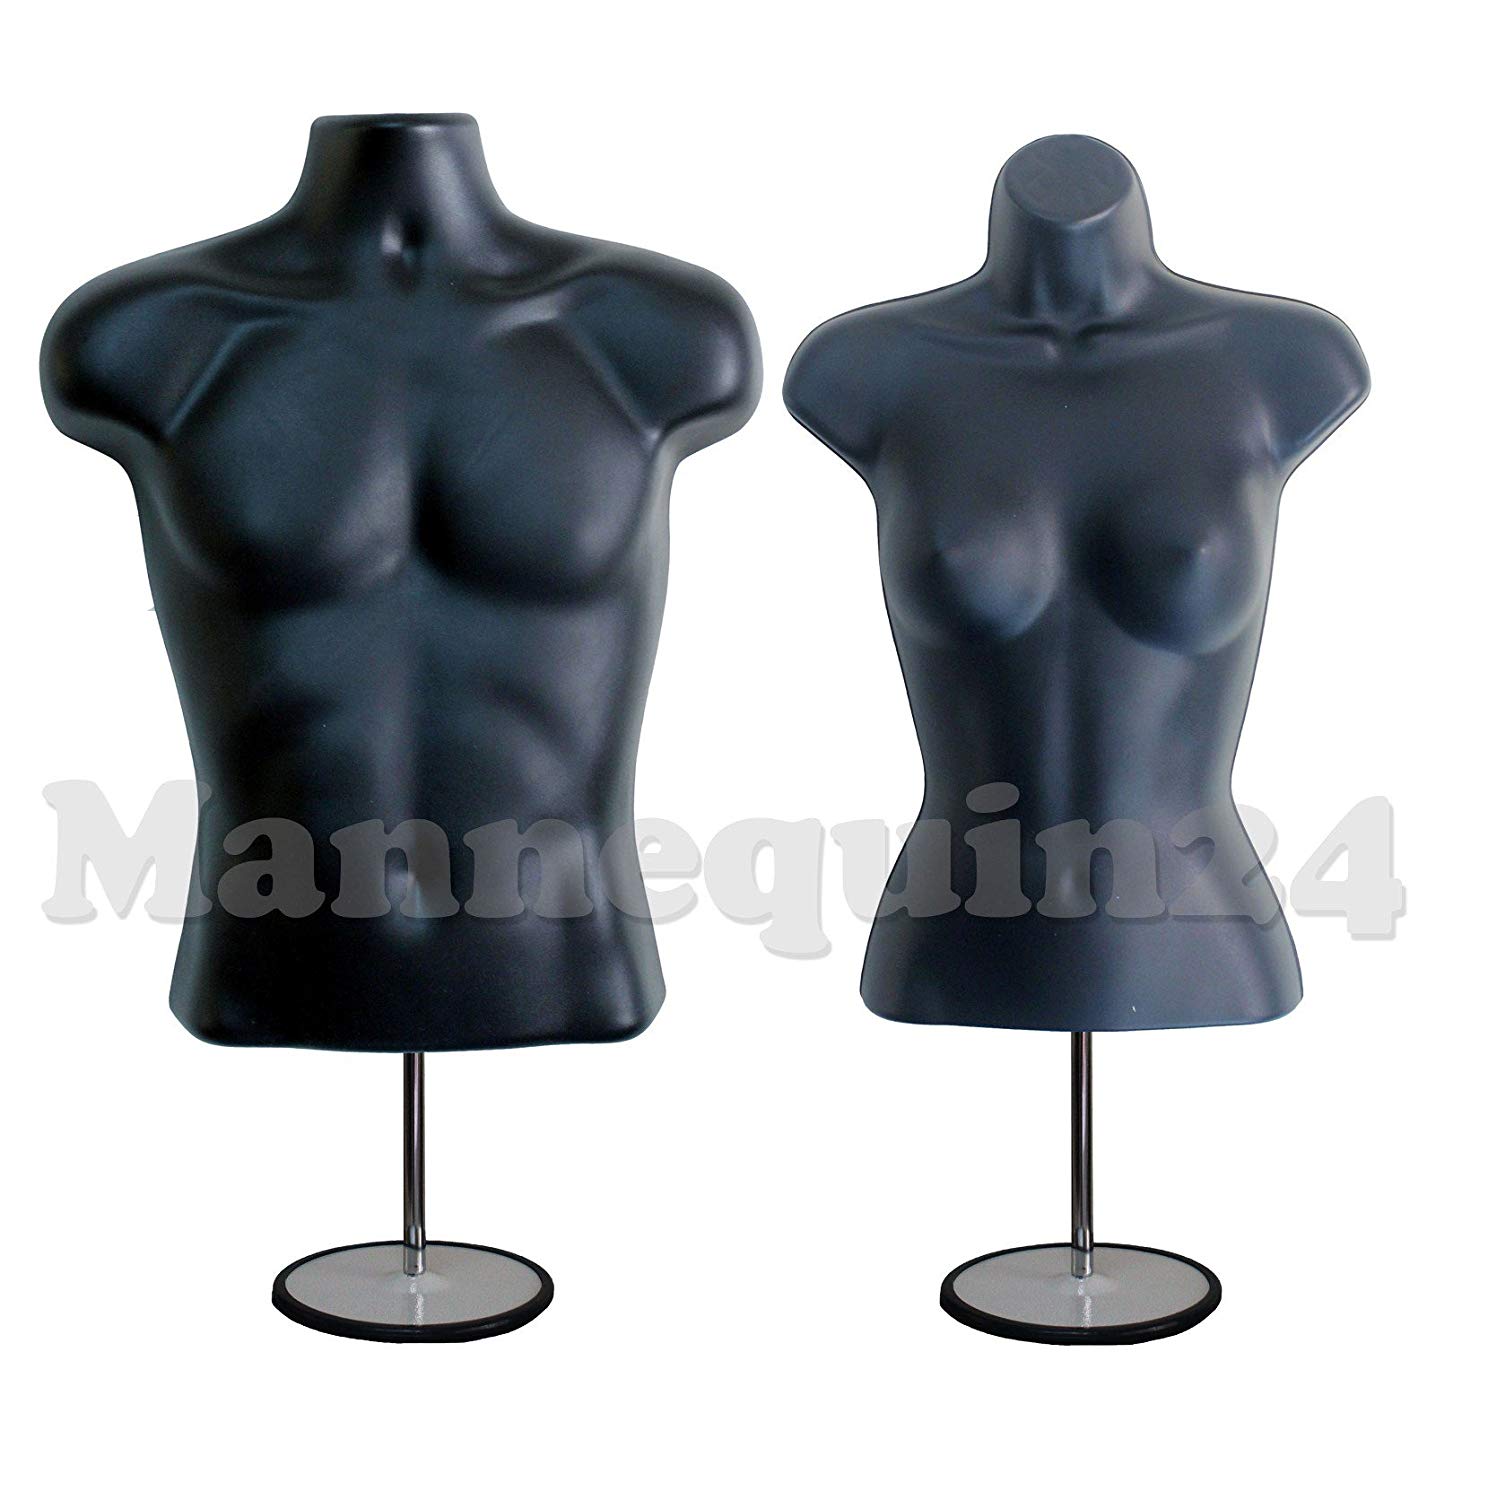 Amazon.com: DisplayTown Mannequin Forms Male and Female Torso With ...